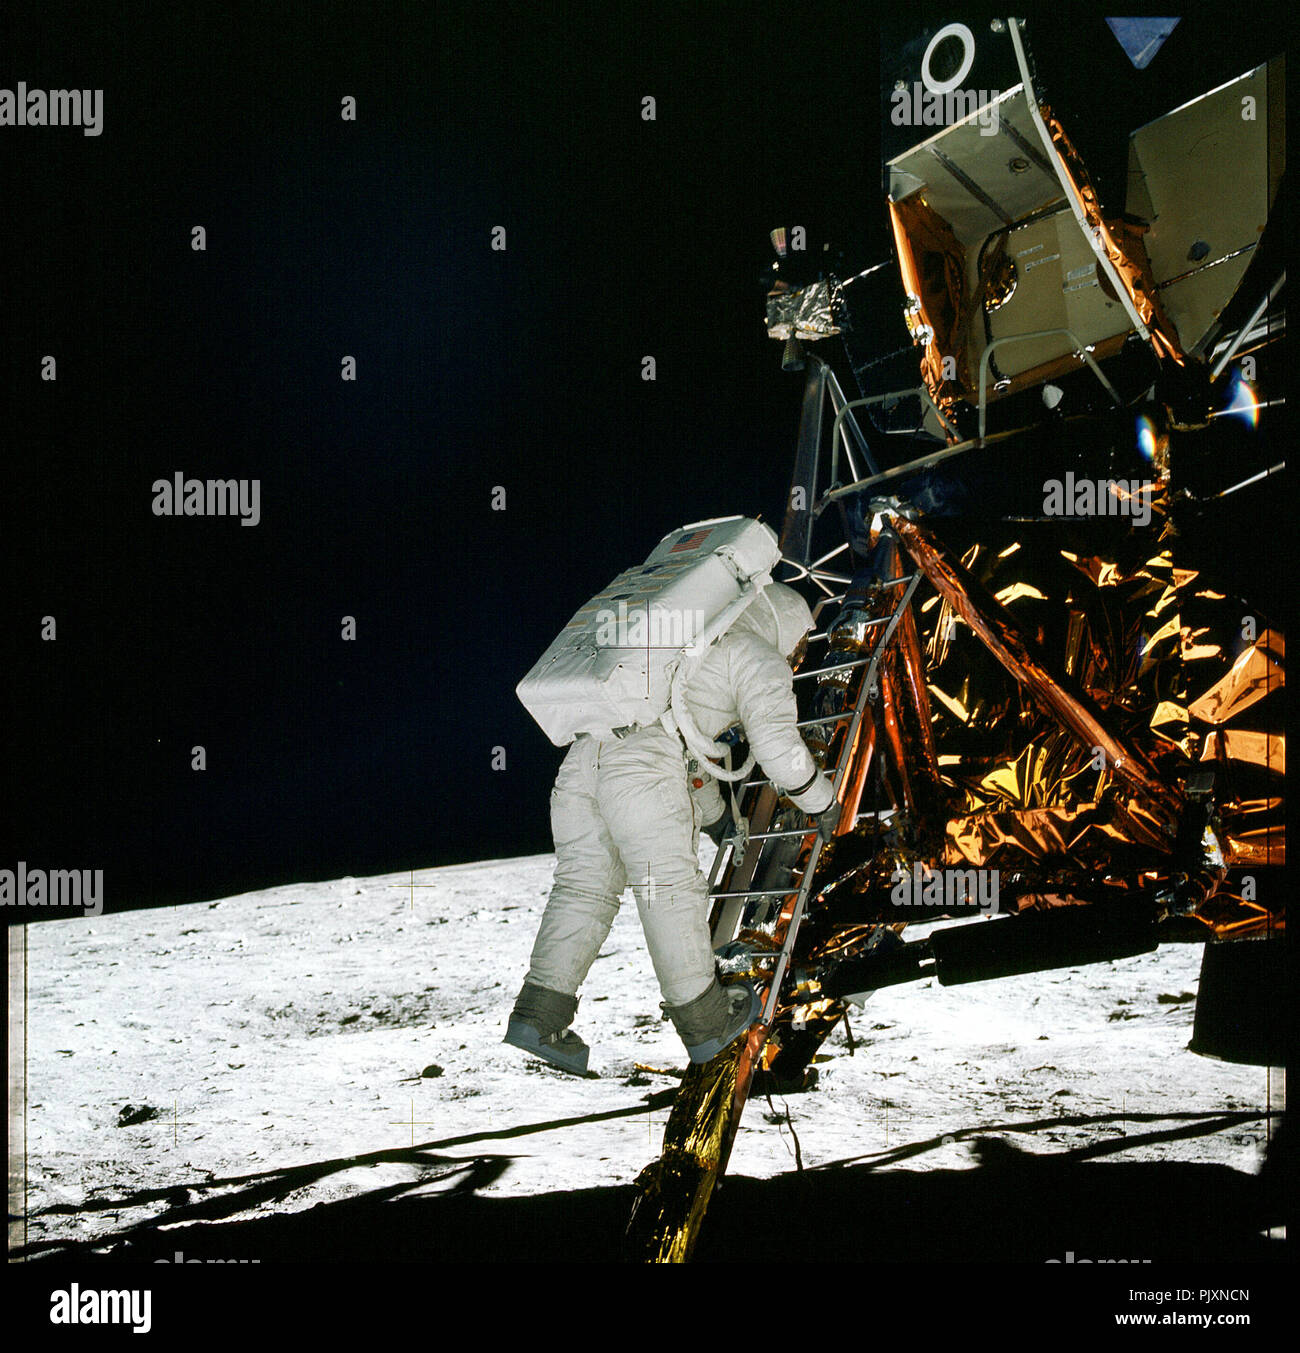 The Moon - (FILE) -- Apollo 11 Lunar Module pilot Edwin Aldrin climbs down the ladder to the Moon's surface as Commander Neil Armstrong photographs his descent. Aldrin stepped onto the surface on Sunday, July 20, 1969, 11:15 EDT and became the second person to walk on the Moon.   Credit: NASA via CNP /MediaPunch Stock Photo